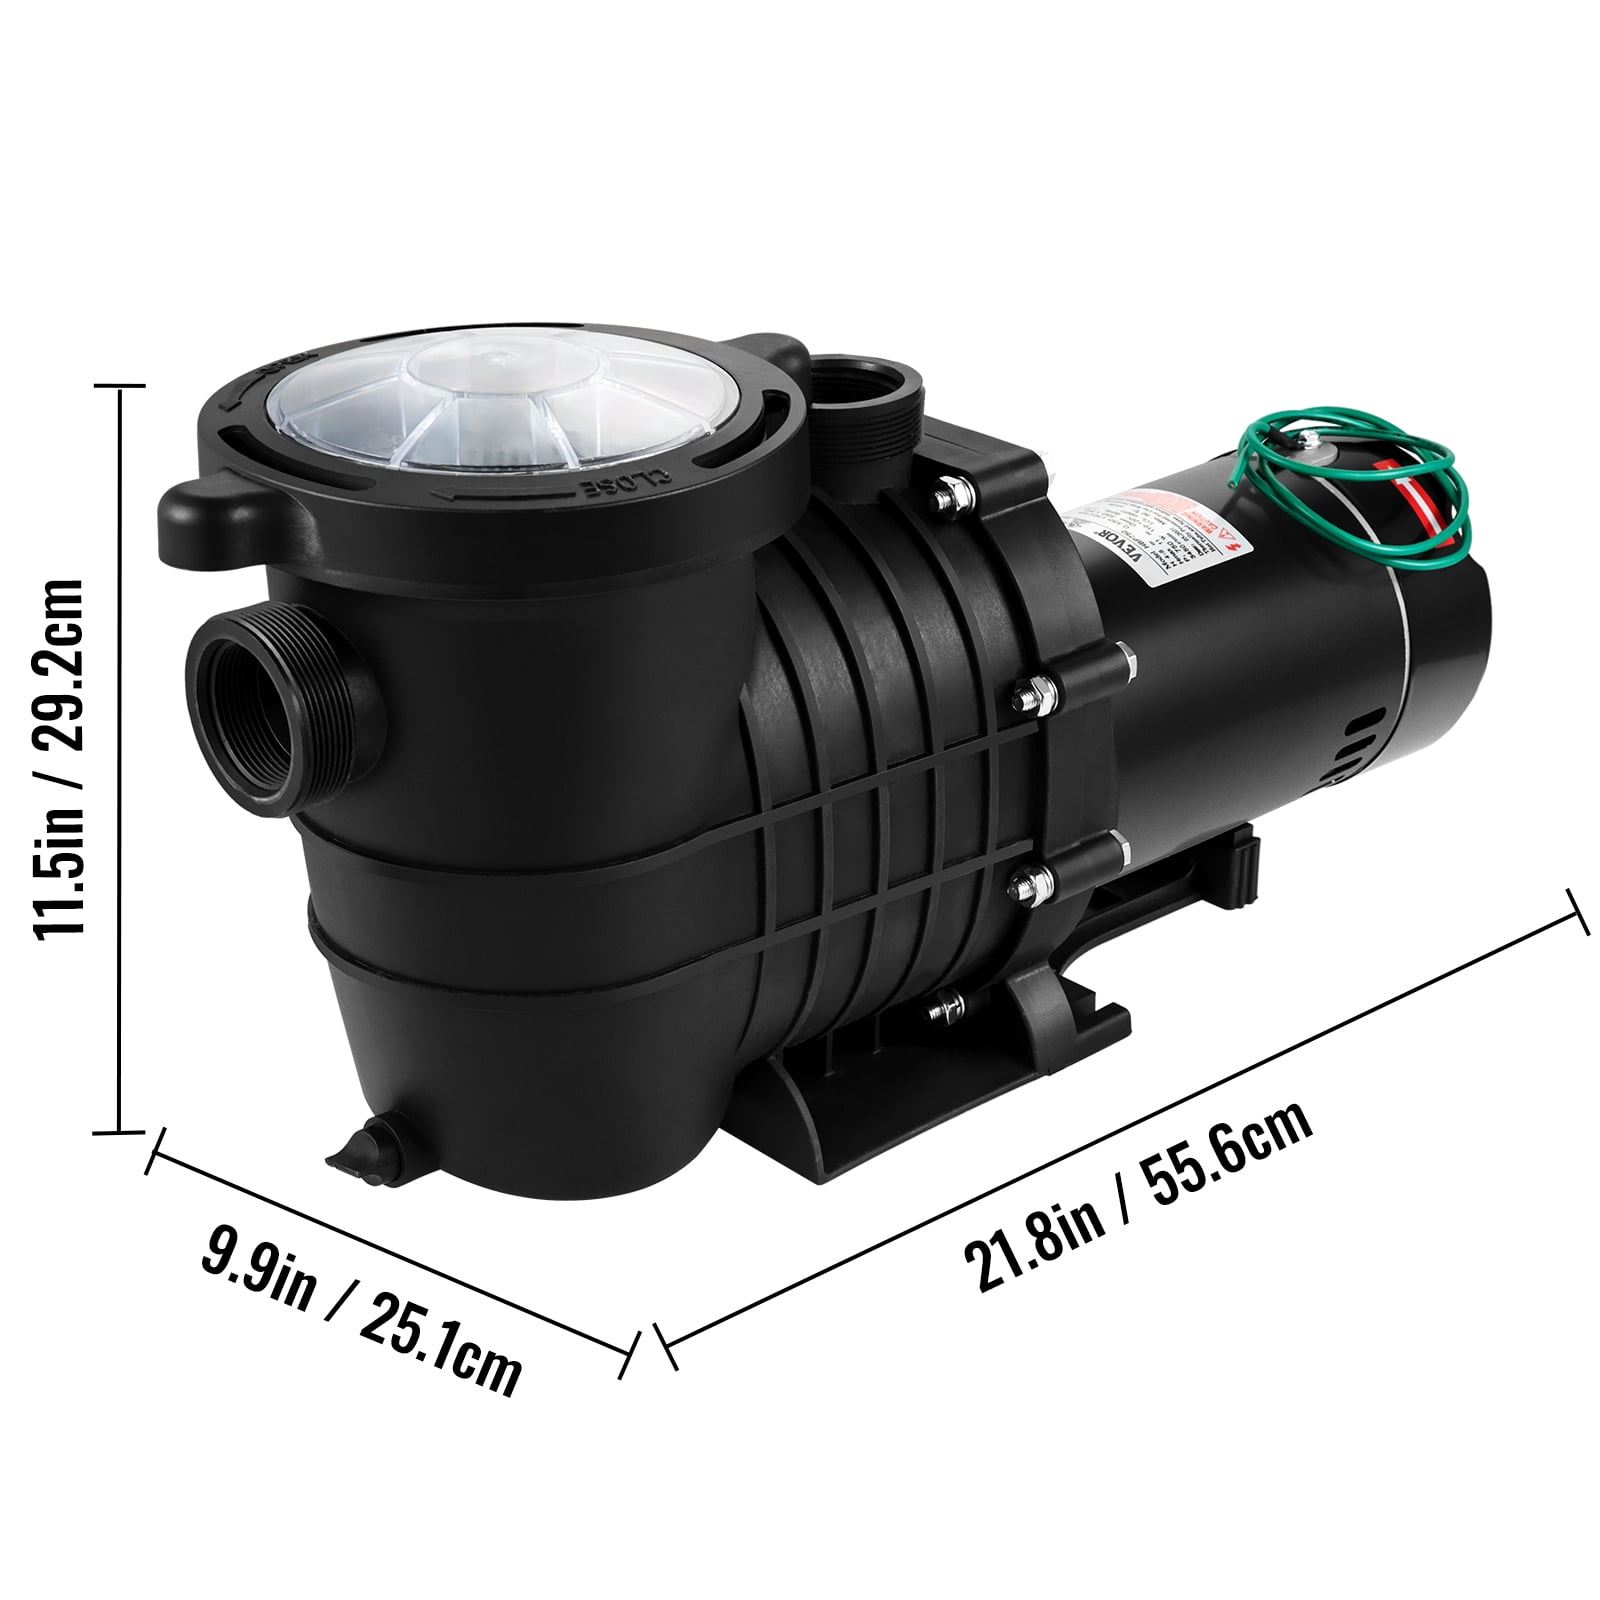 VEVOR Swimming Pool Pump, 1HP 110V/220V 5544GPH Powerful Self-priming Up to 34ft Head Lift, for In/Above Ground Pool Water Circulation, w/ Strainer Basket 2pcs 1-1/2'' NPT Connectors, UL Certified - Walmart.com